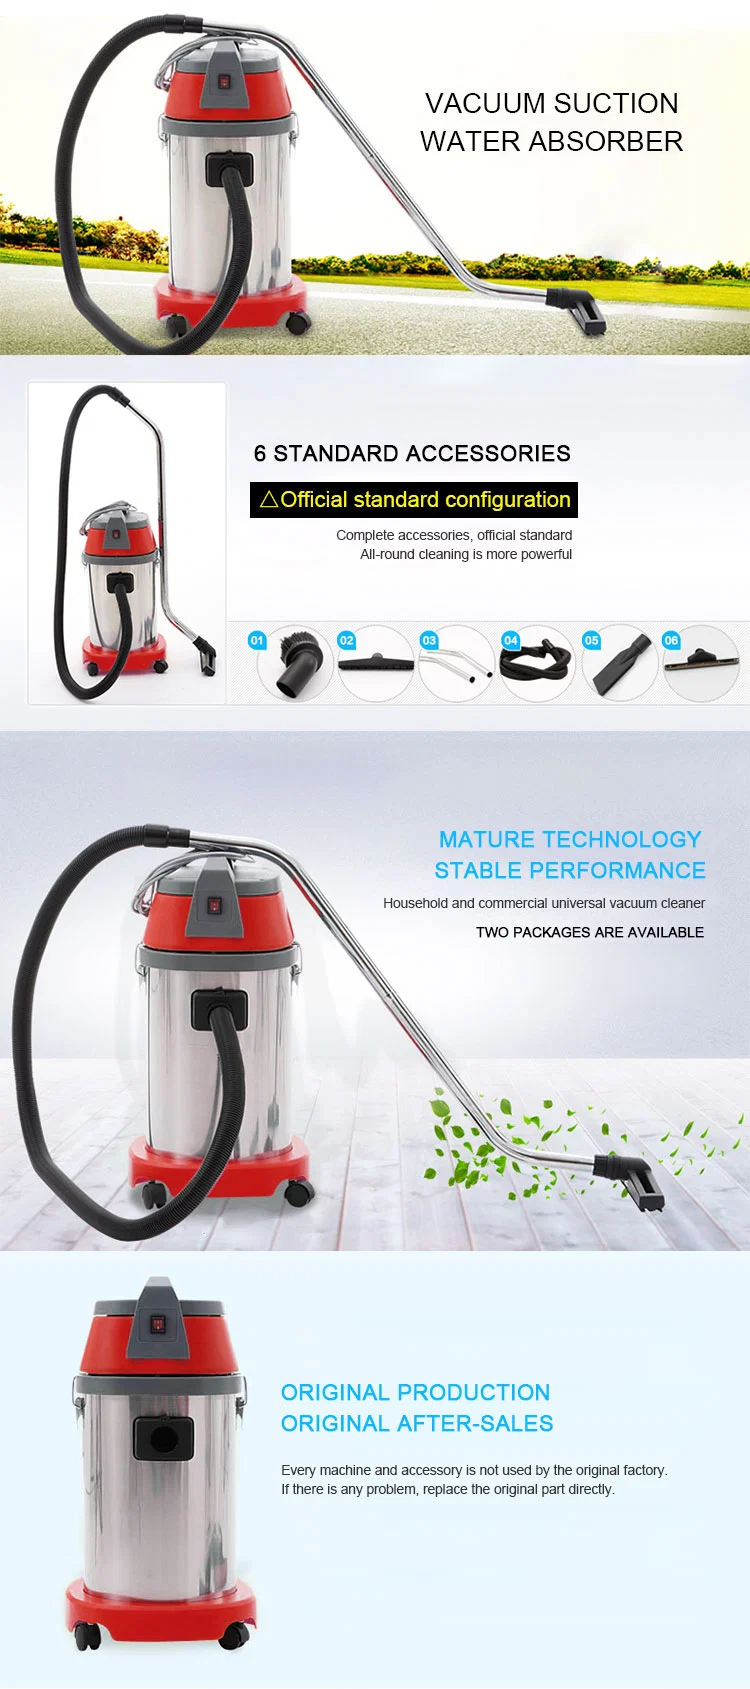 Kd501 Red Economical Professional Dry Wet Vacuum Cleaner with Silence Design